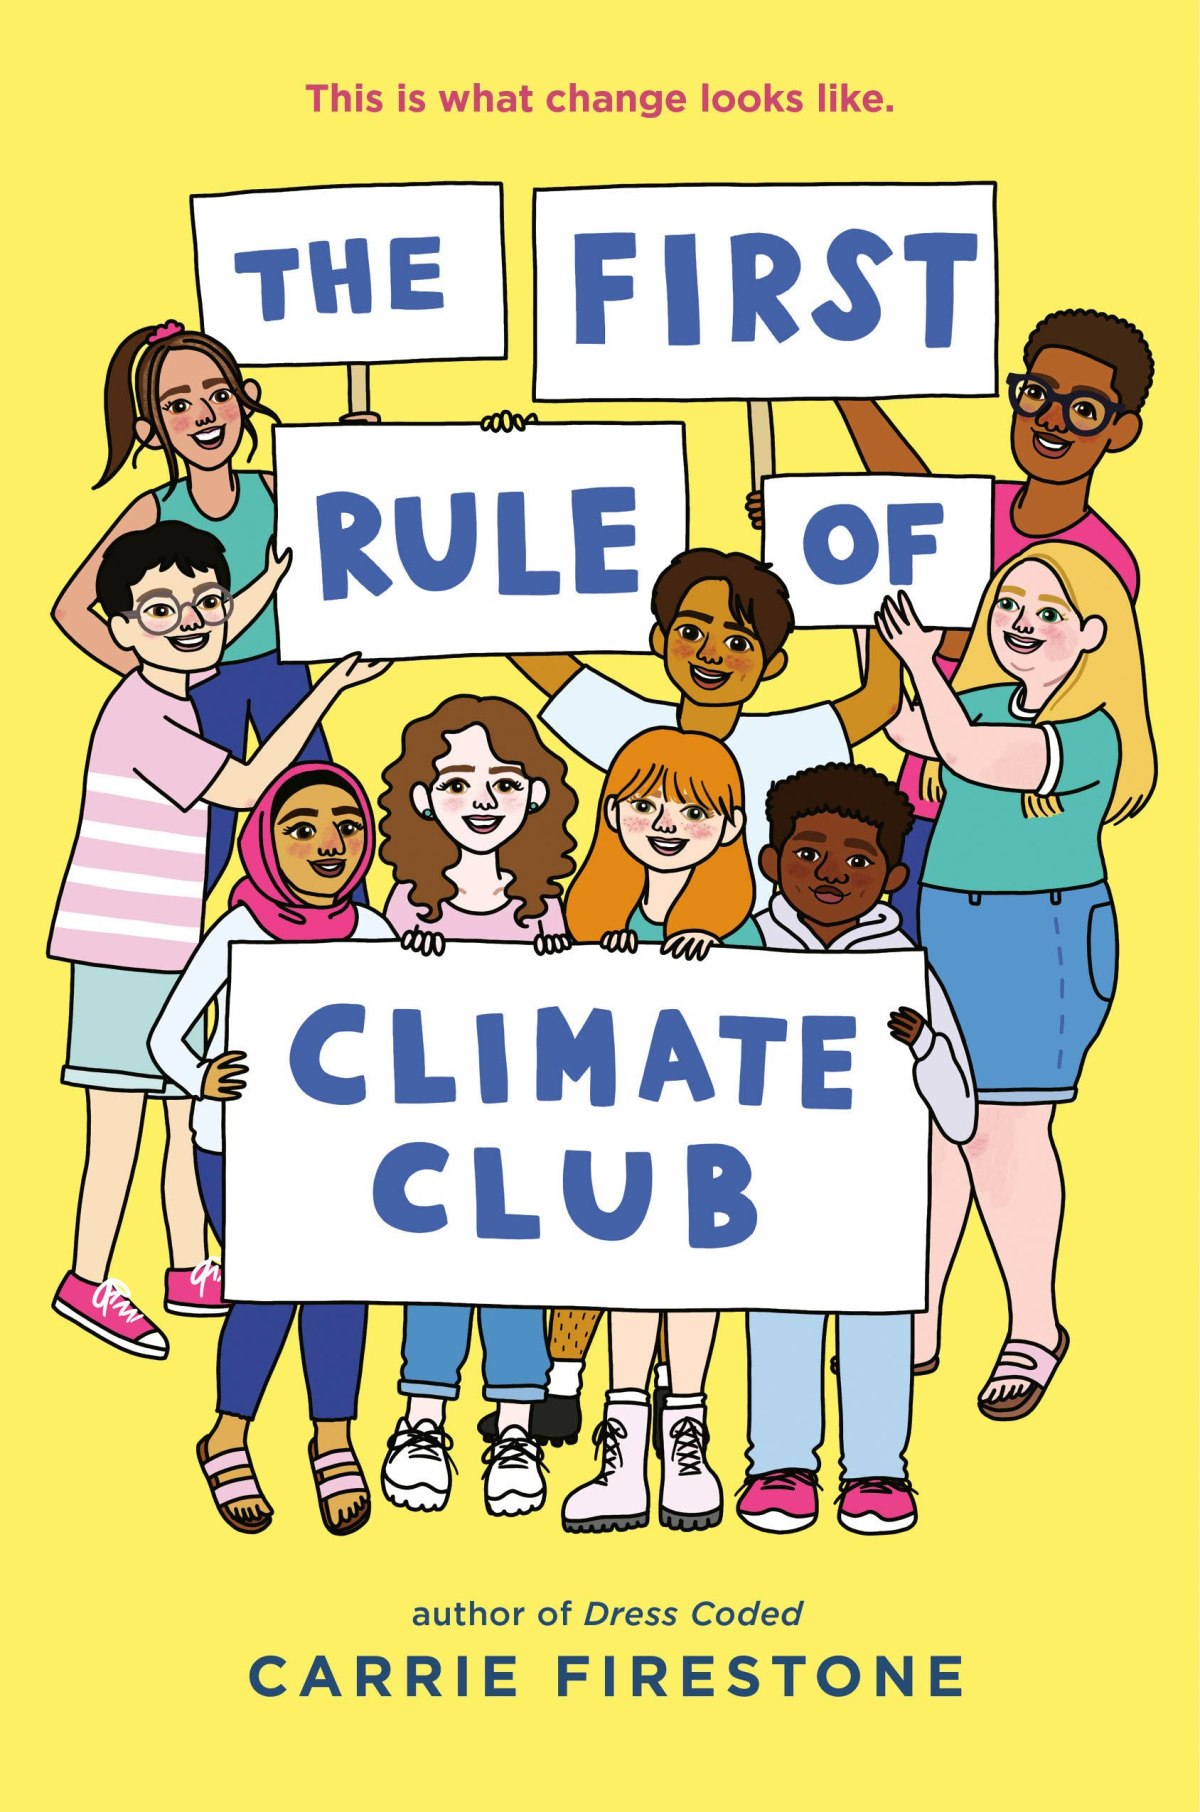 simple book illustration with middle school-aged children holding signs above their head and in front of their bodies while smiling at the reader, the text on their signs reads 'the first rule of climate club' accompanied by text reading 'this is what change looks like. author or dress coded, Carrie Firestone'